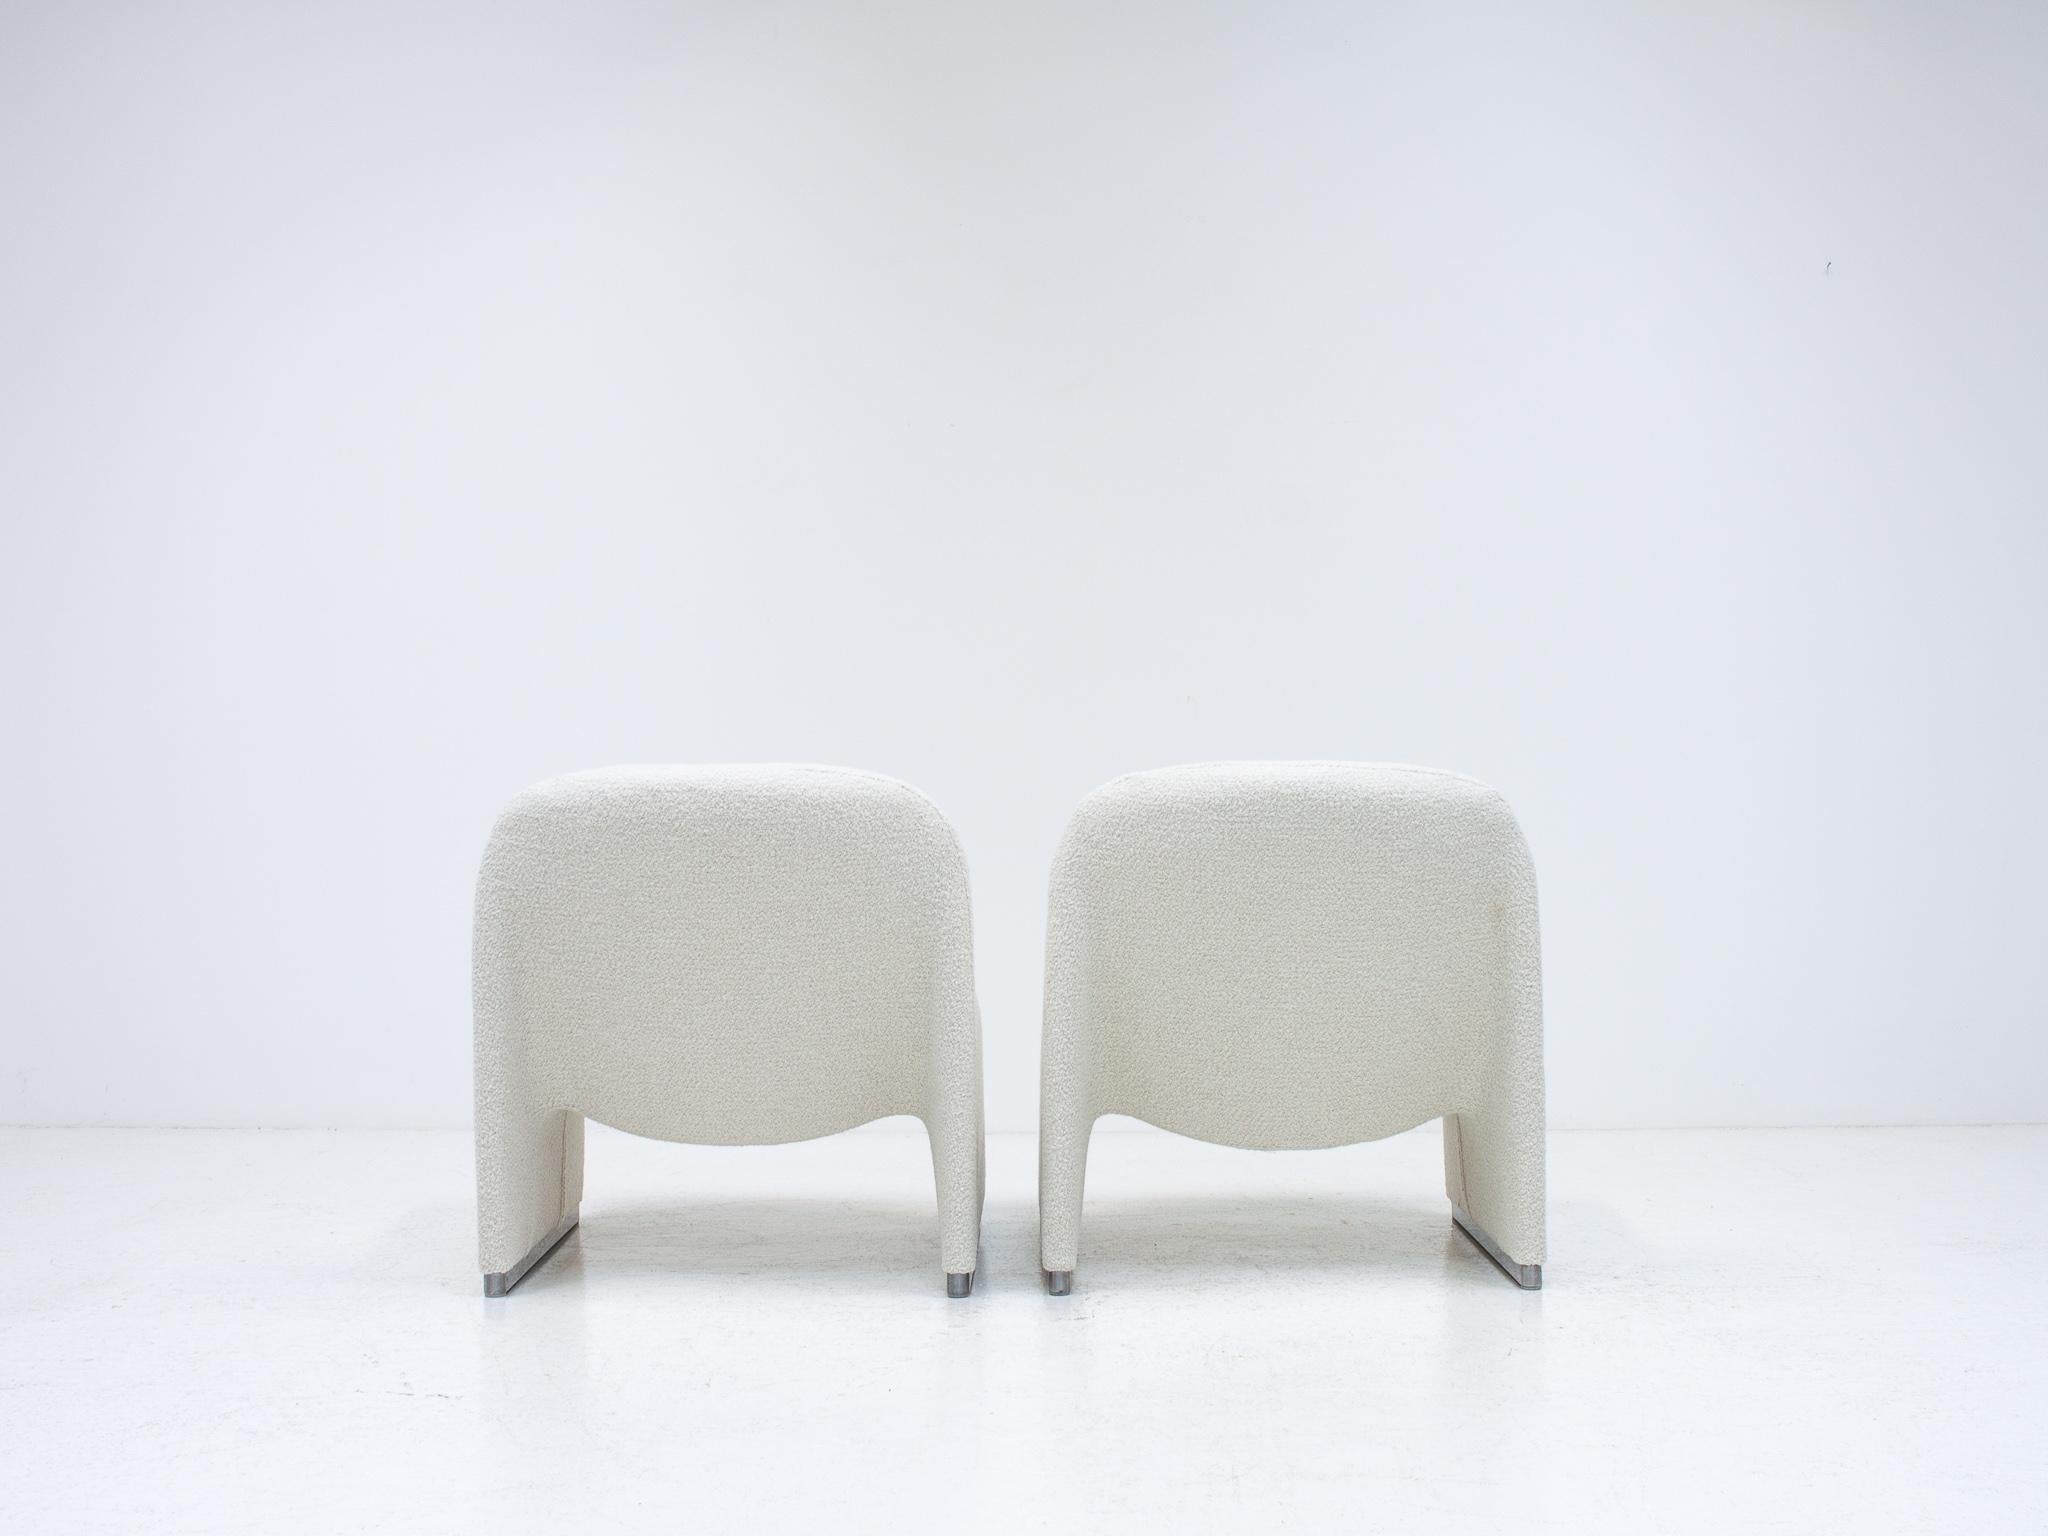 Giancarlo Piretti “Alky” Chairs In Yarn Collective bouclé *Customizable* For Sale 7